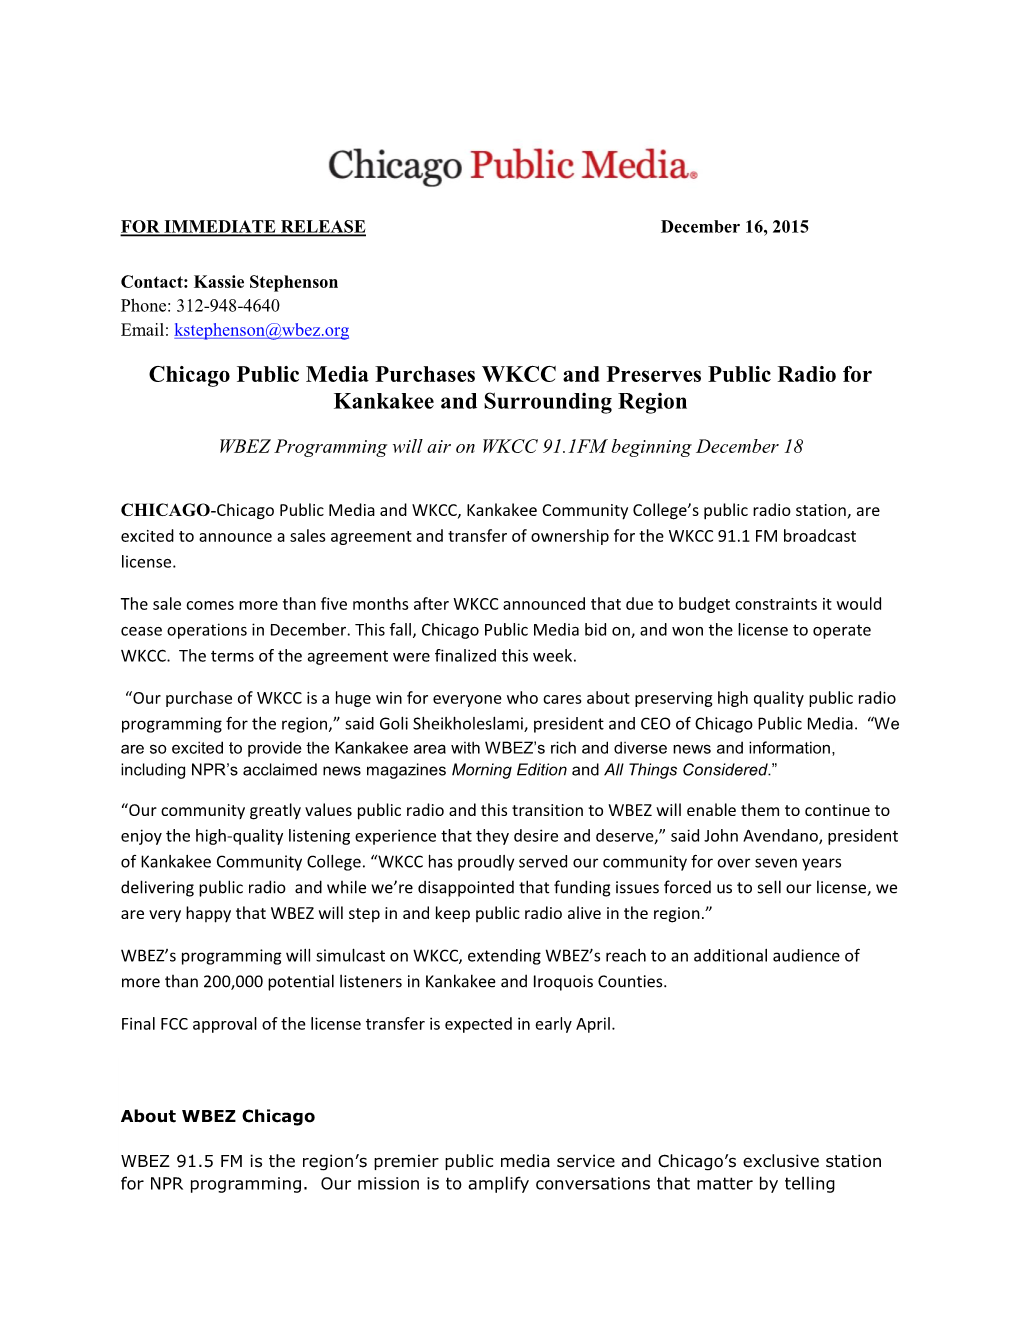 Chicago Public Media Purchases WKCC and Preserves Public Radio for Kankakee and Surrounding Region